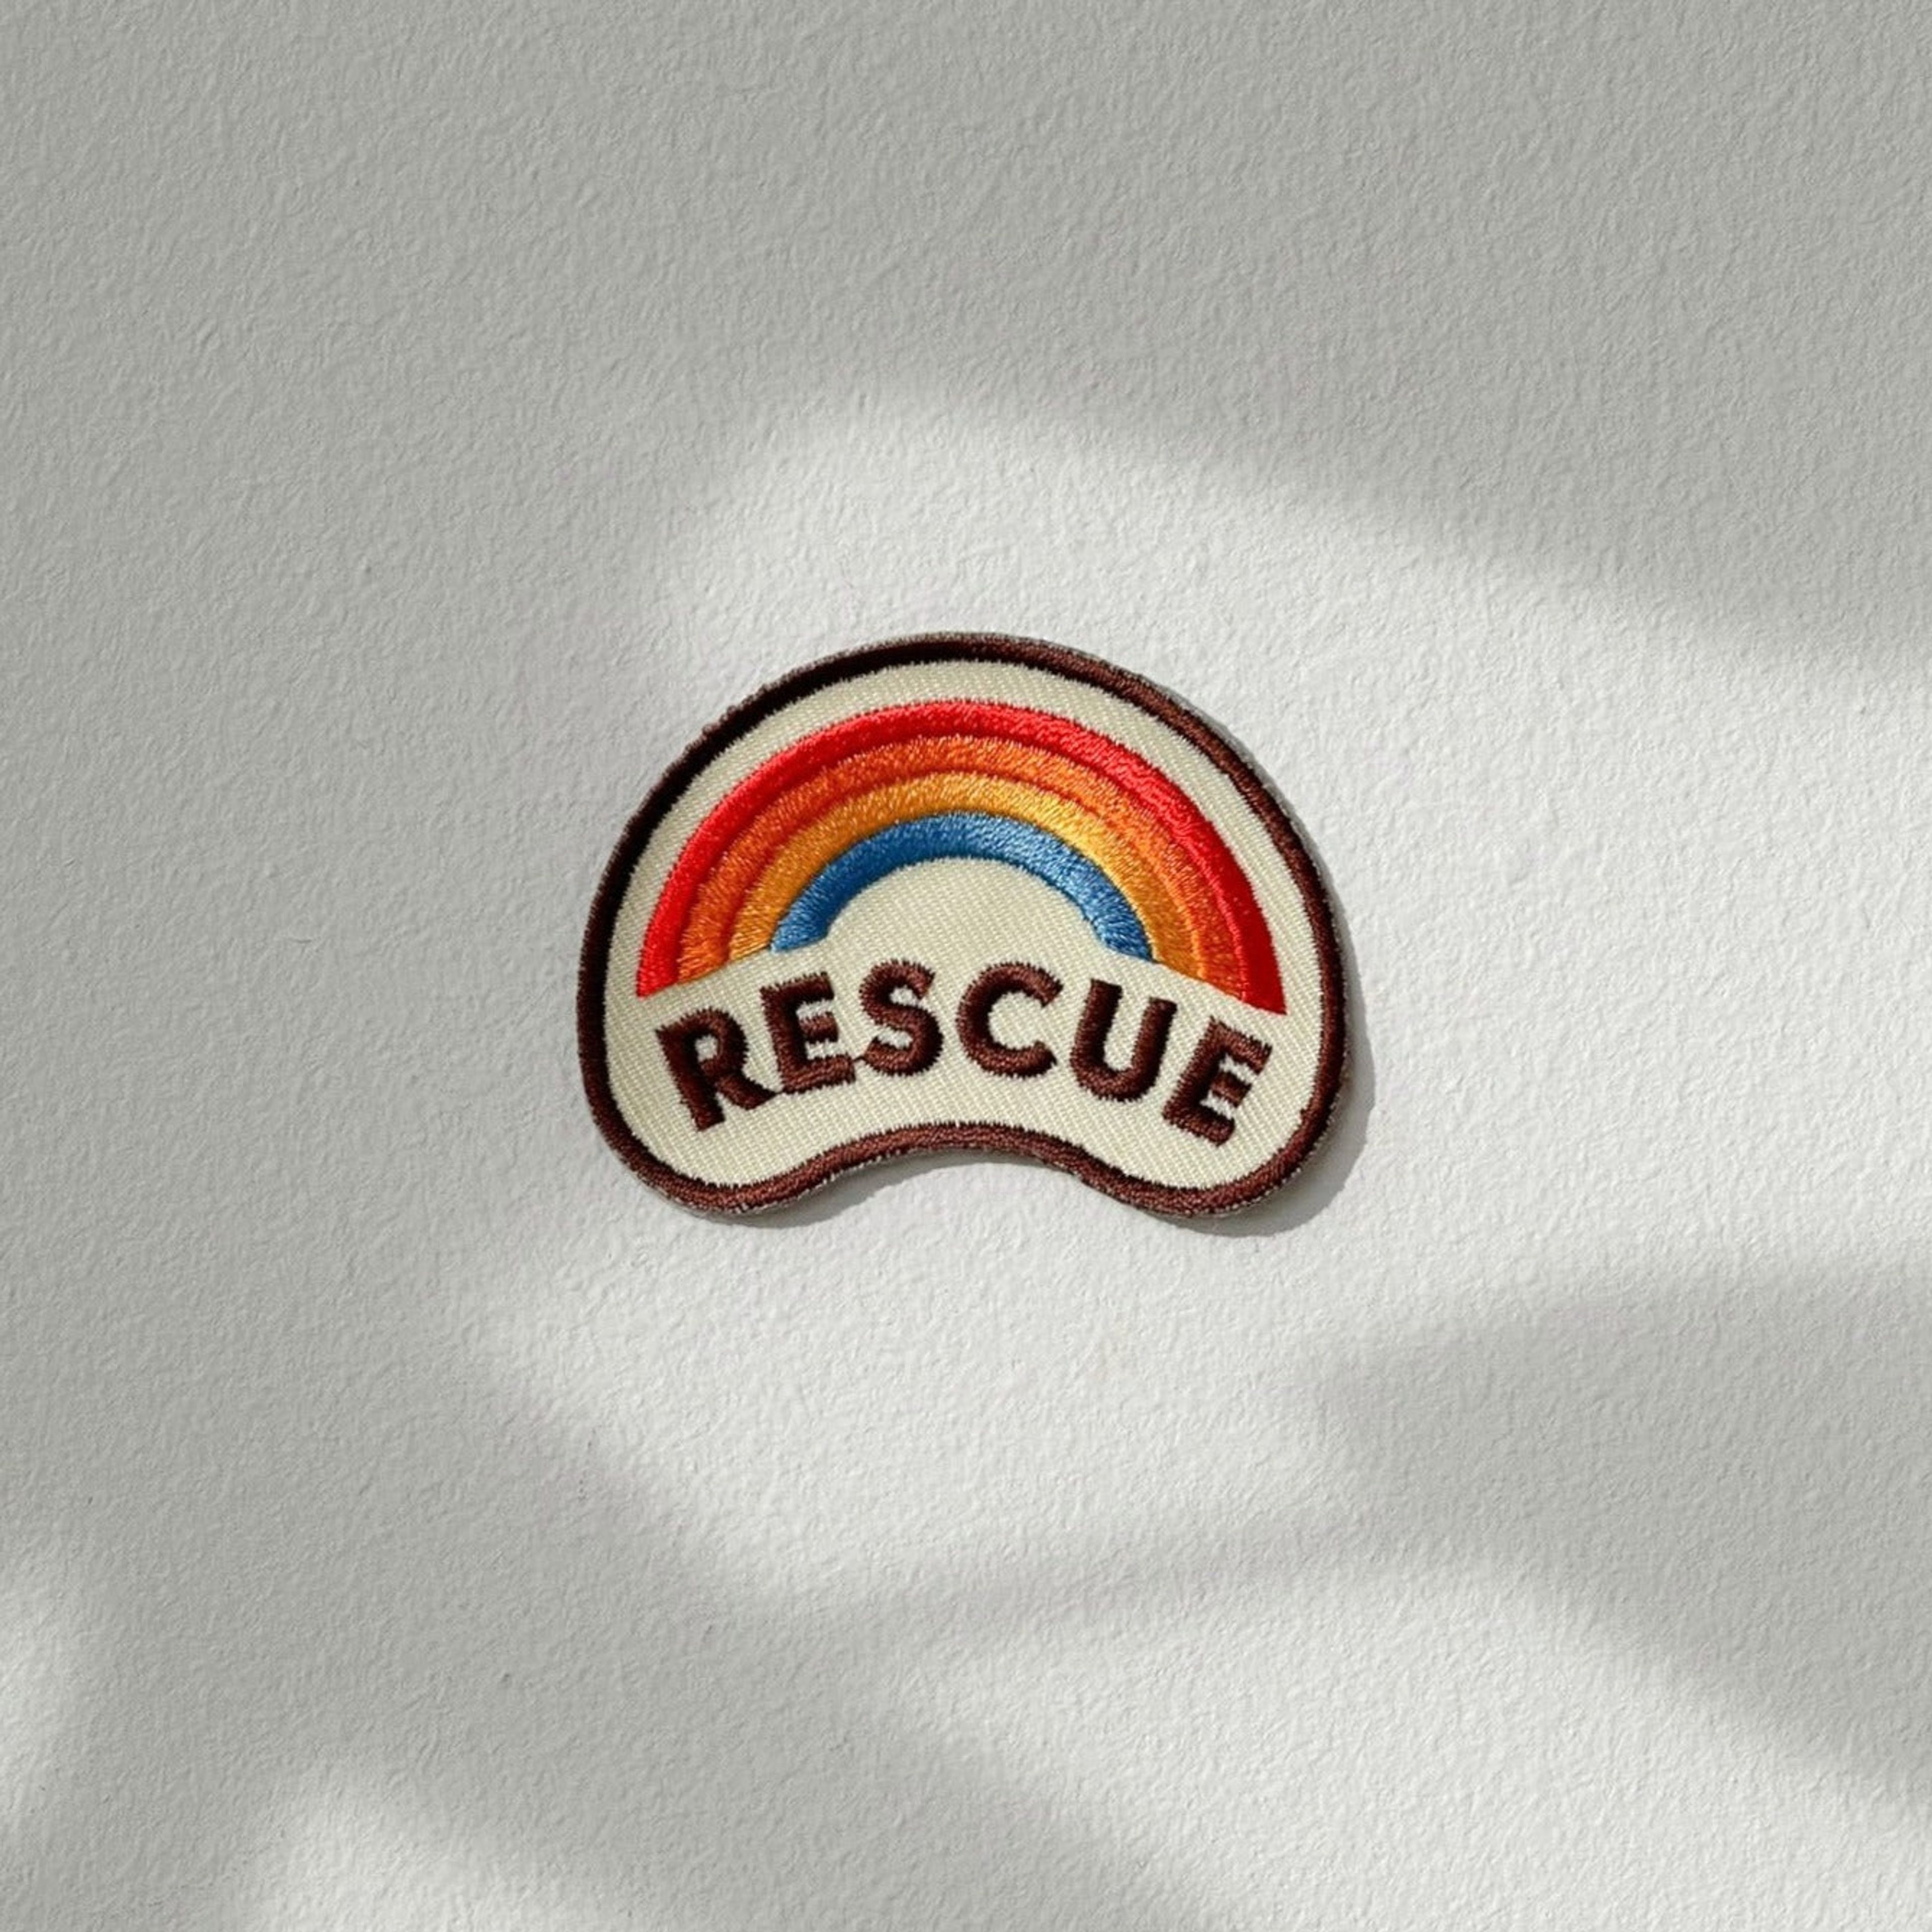 Rescue - Iron-on Patch